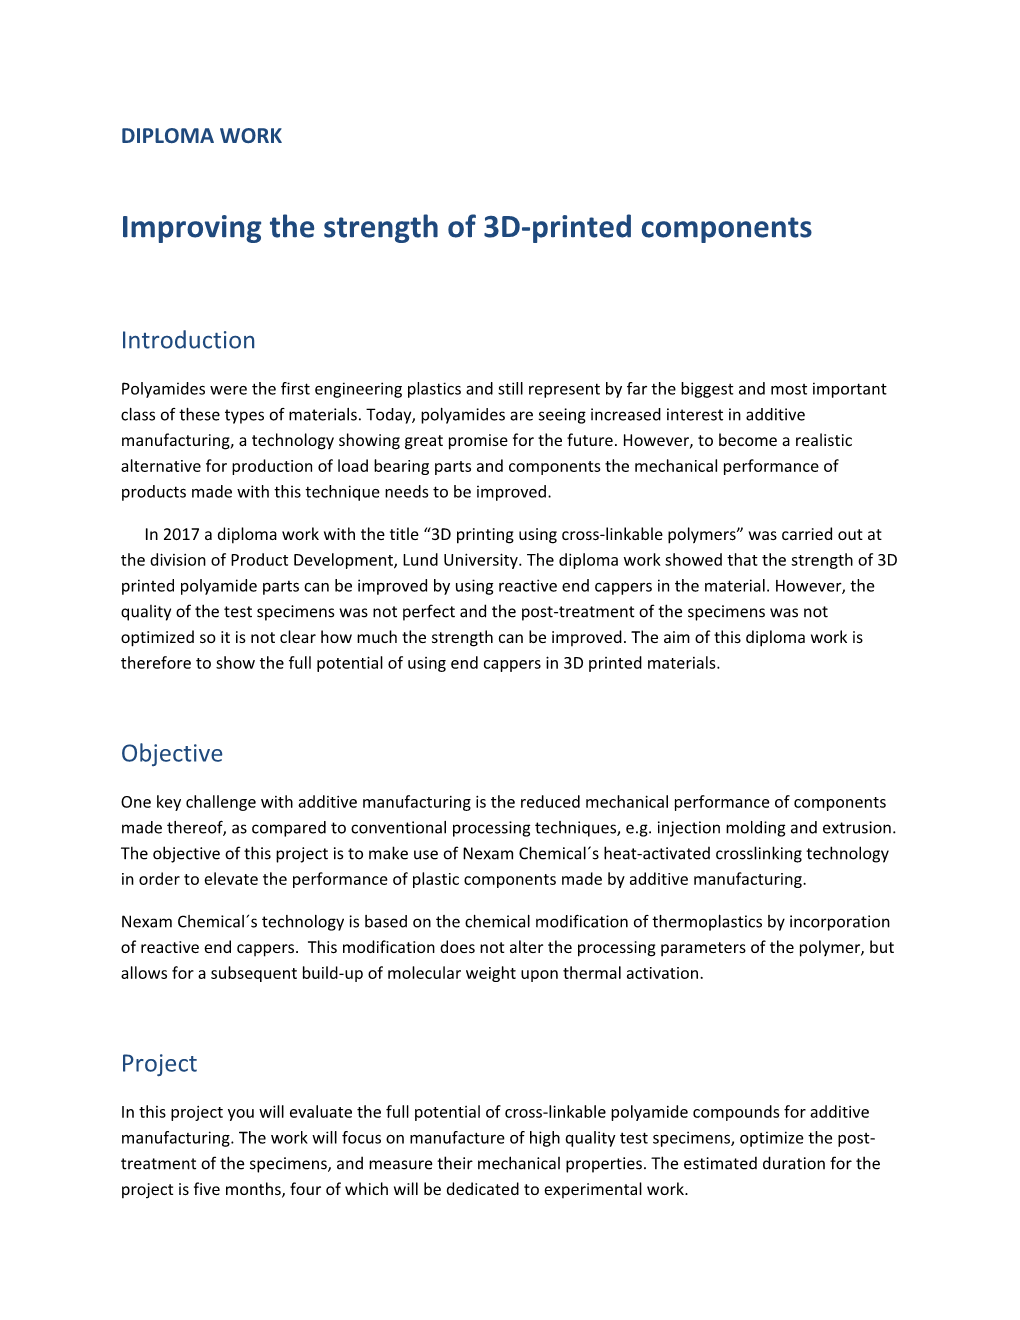 Improving the Strength of 3D-Printed Components